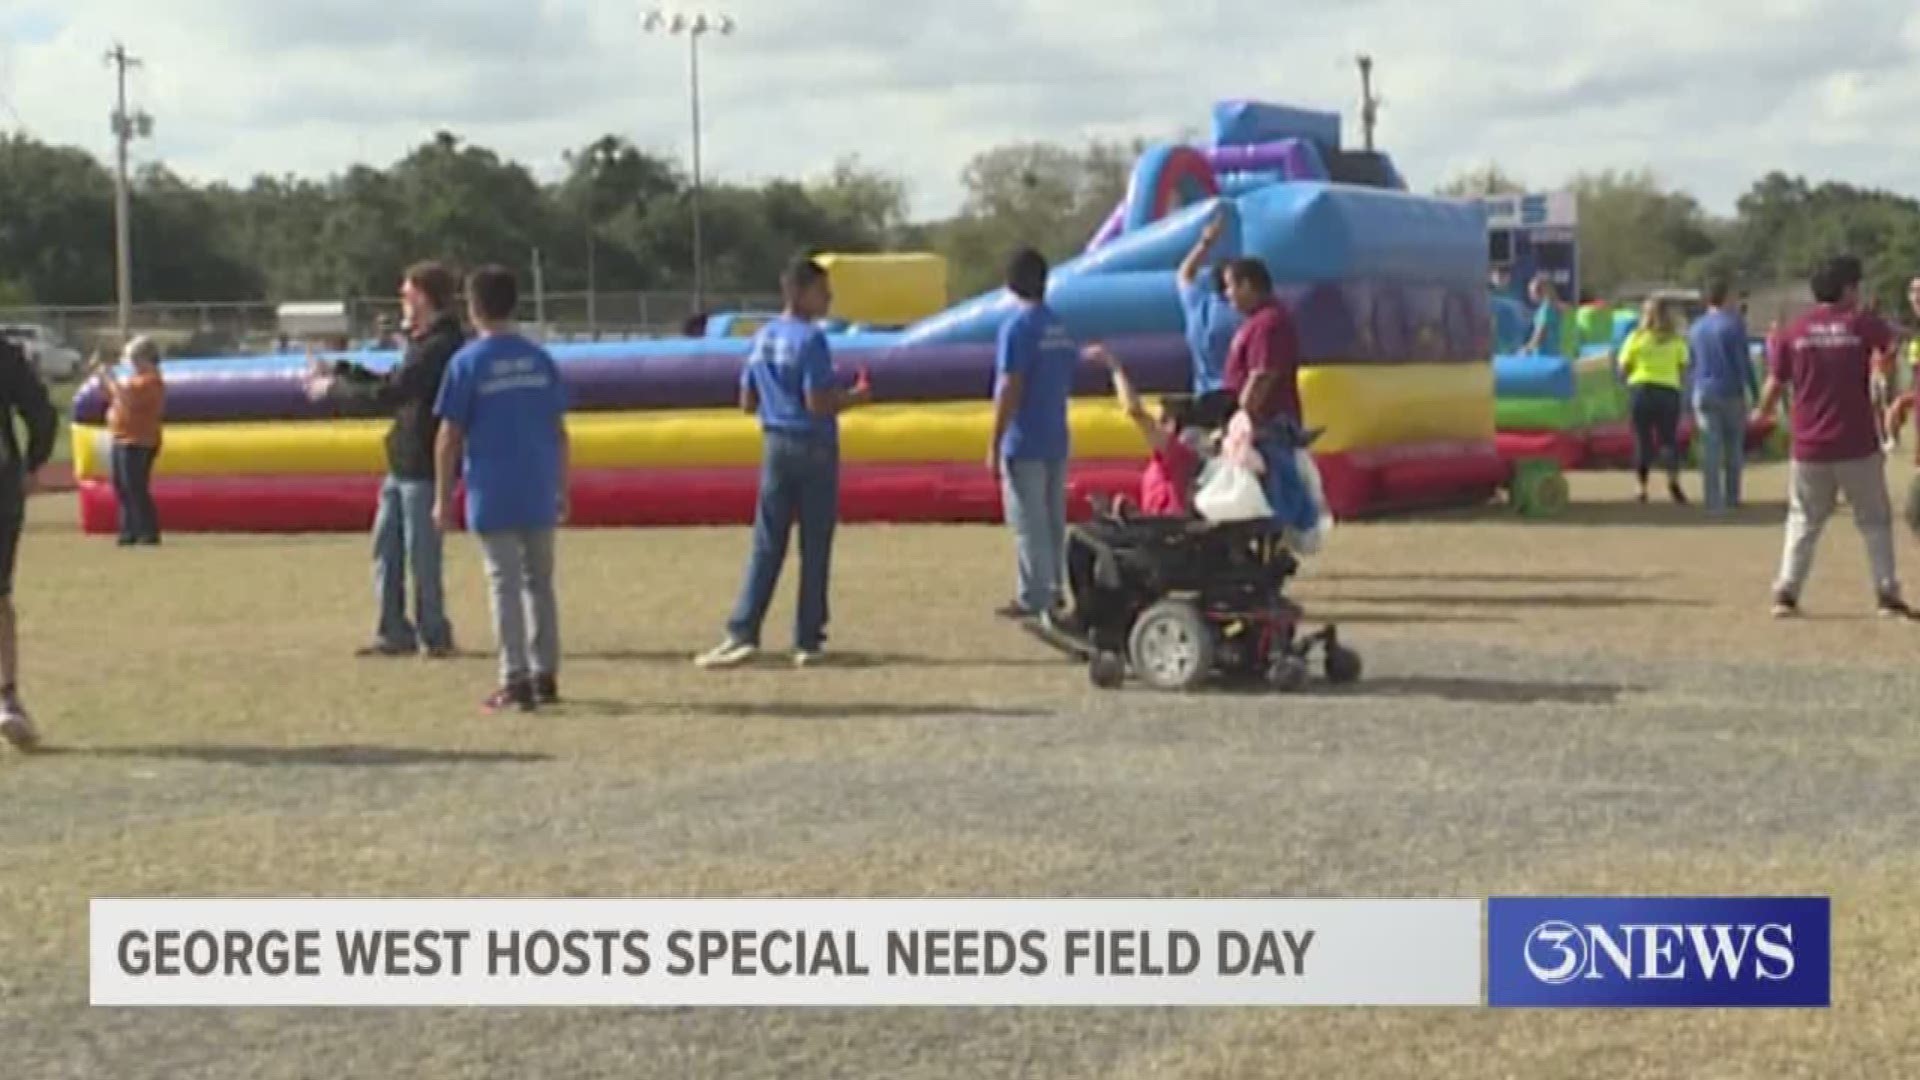 More than 250 kids with special needs over in George West got to participate in an extra special field day Wednesday morning.